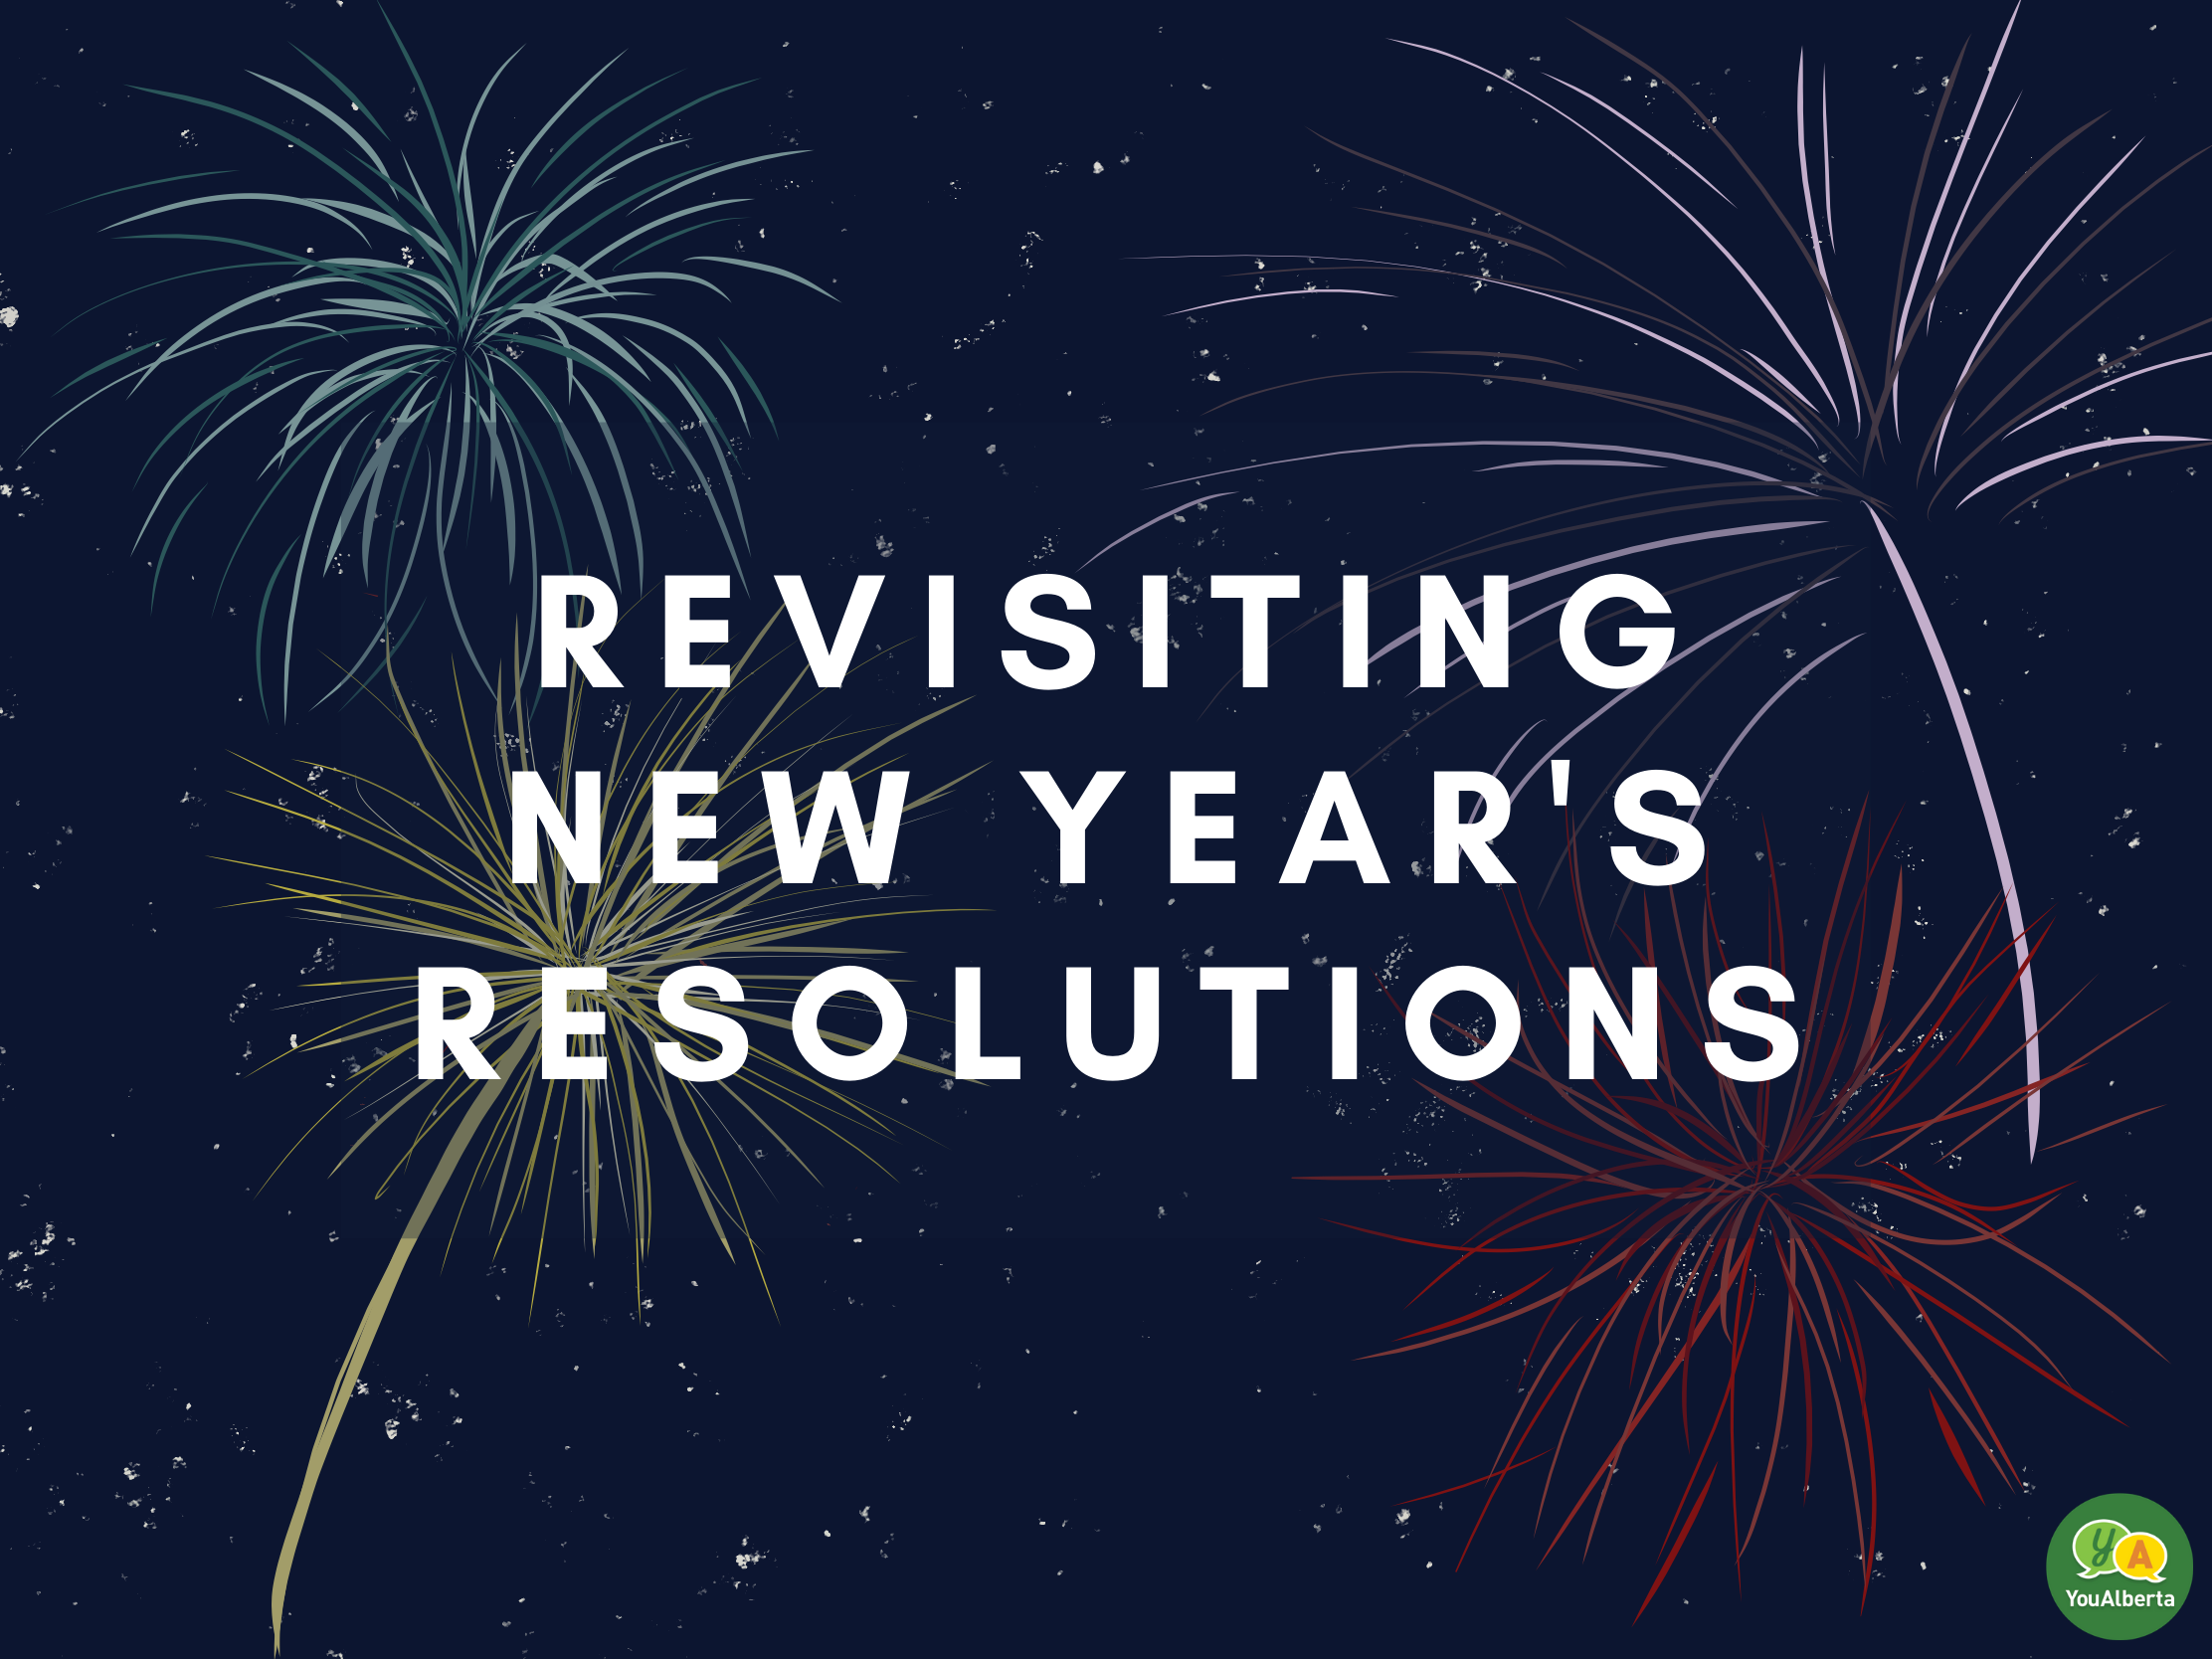 revisiting-new-years-resolutions-1evrw_4k6vh_gq5ula8vbxw.png